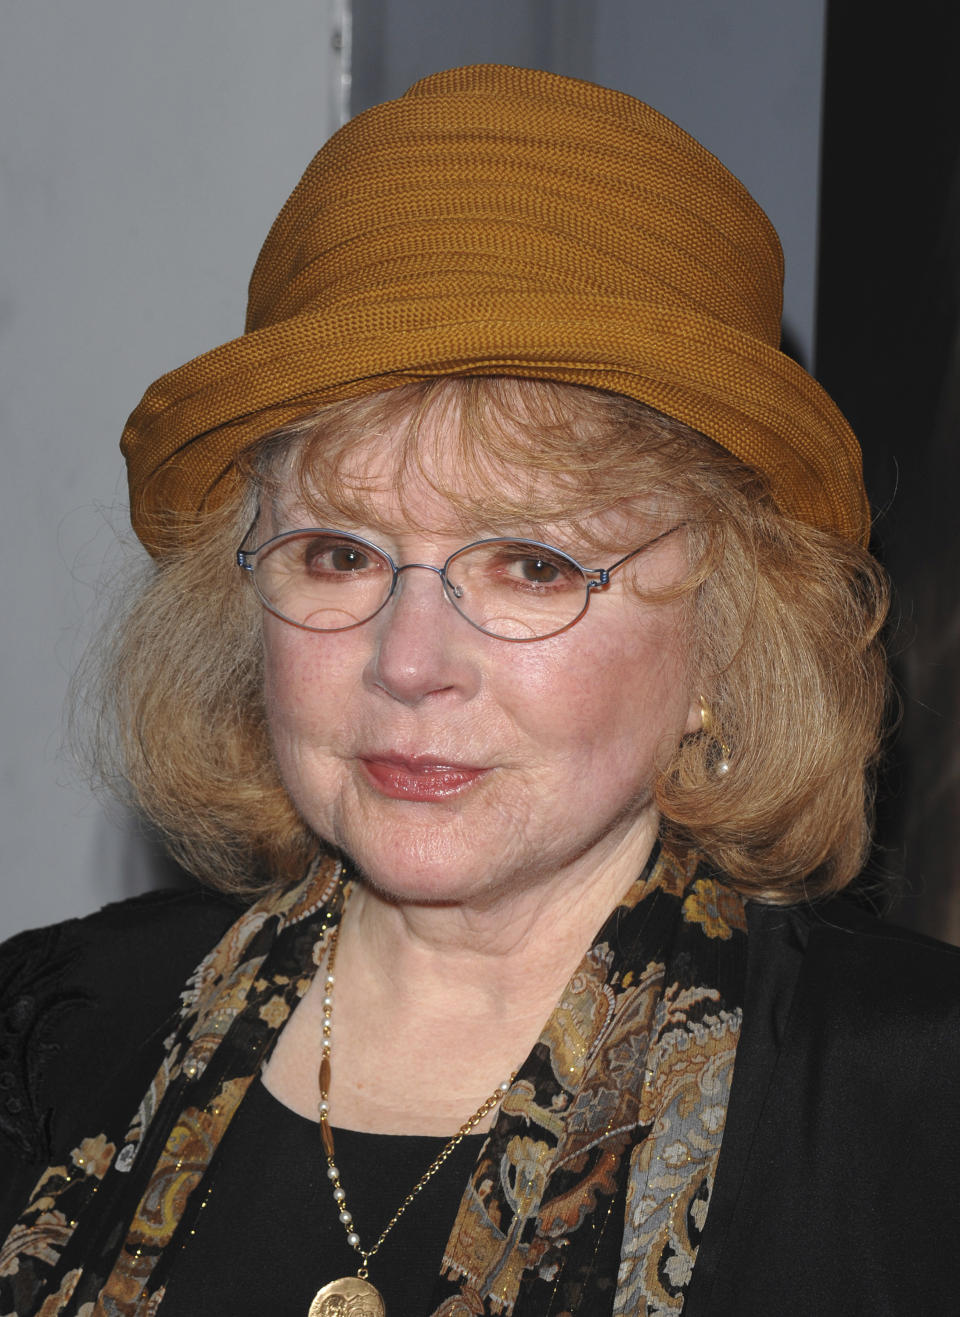 FILE - Actress Piper Laurie arrives at the premiere of "Hounddog," in New York, Tuesday, Sept. 16, 2008. Laurie, the strong-willed, Oscar-nominated actor who performed in acclaimed roles despite at one point abandoning acting altogether in search of a “more meaningful” life, died early Saturday, Oct. 14, 2023, at her home in Los Angeles. She was 91. (AP Photo/Peter Kramer, File)